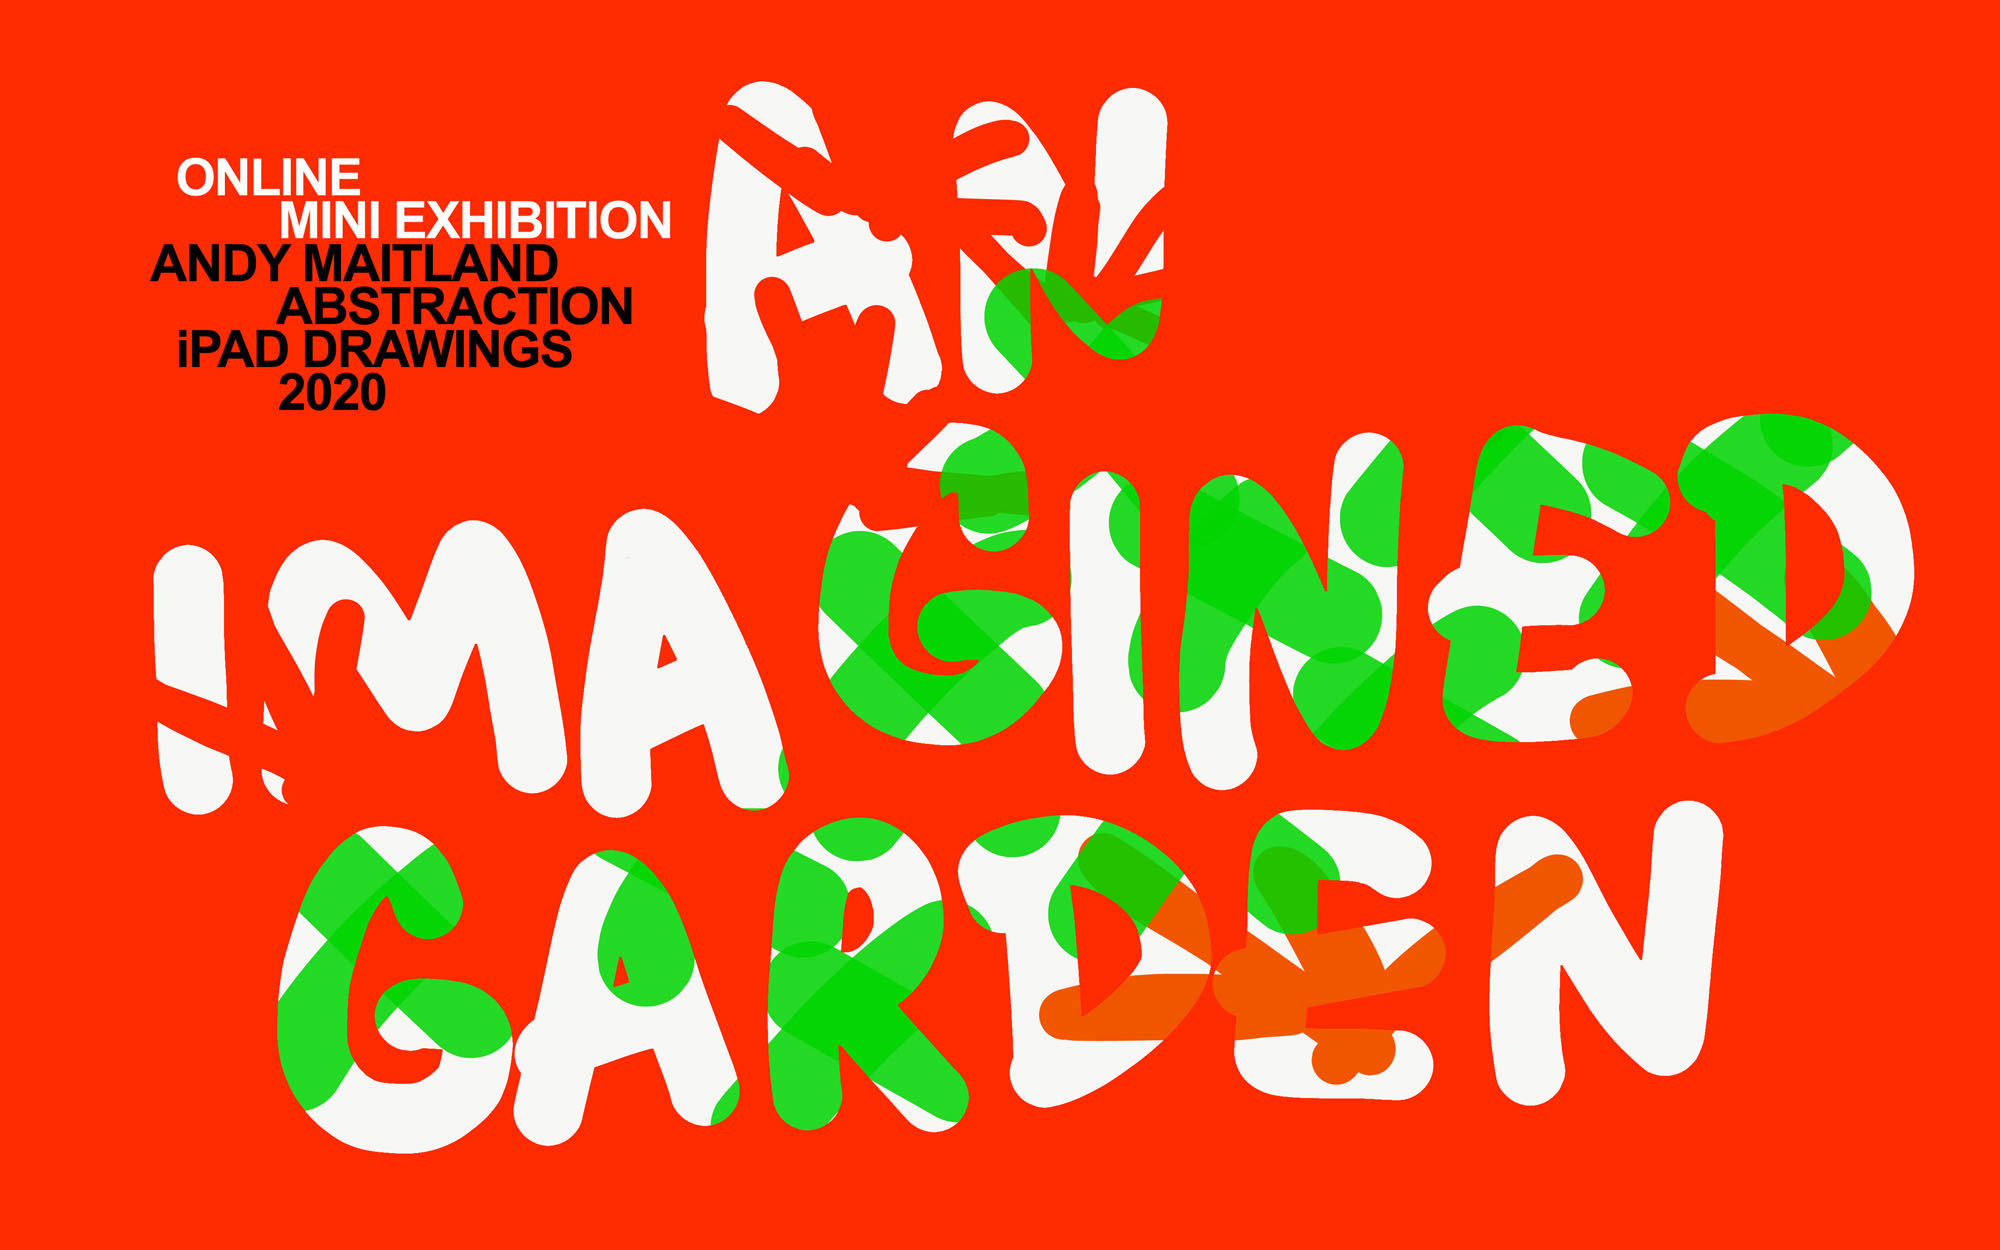 Andy Maitland, iPad artist, An Imagined Garden, abstraction iPad drawings 2020-2022 exhibition